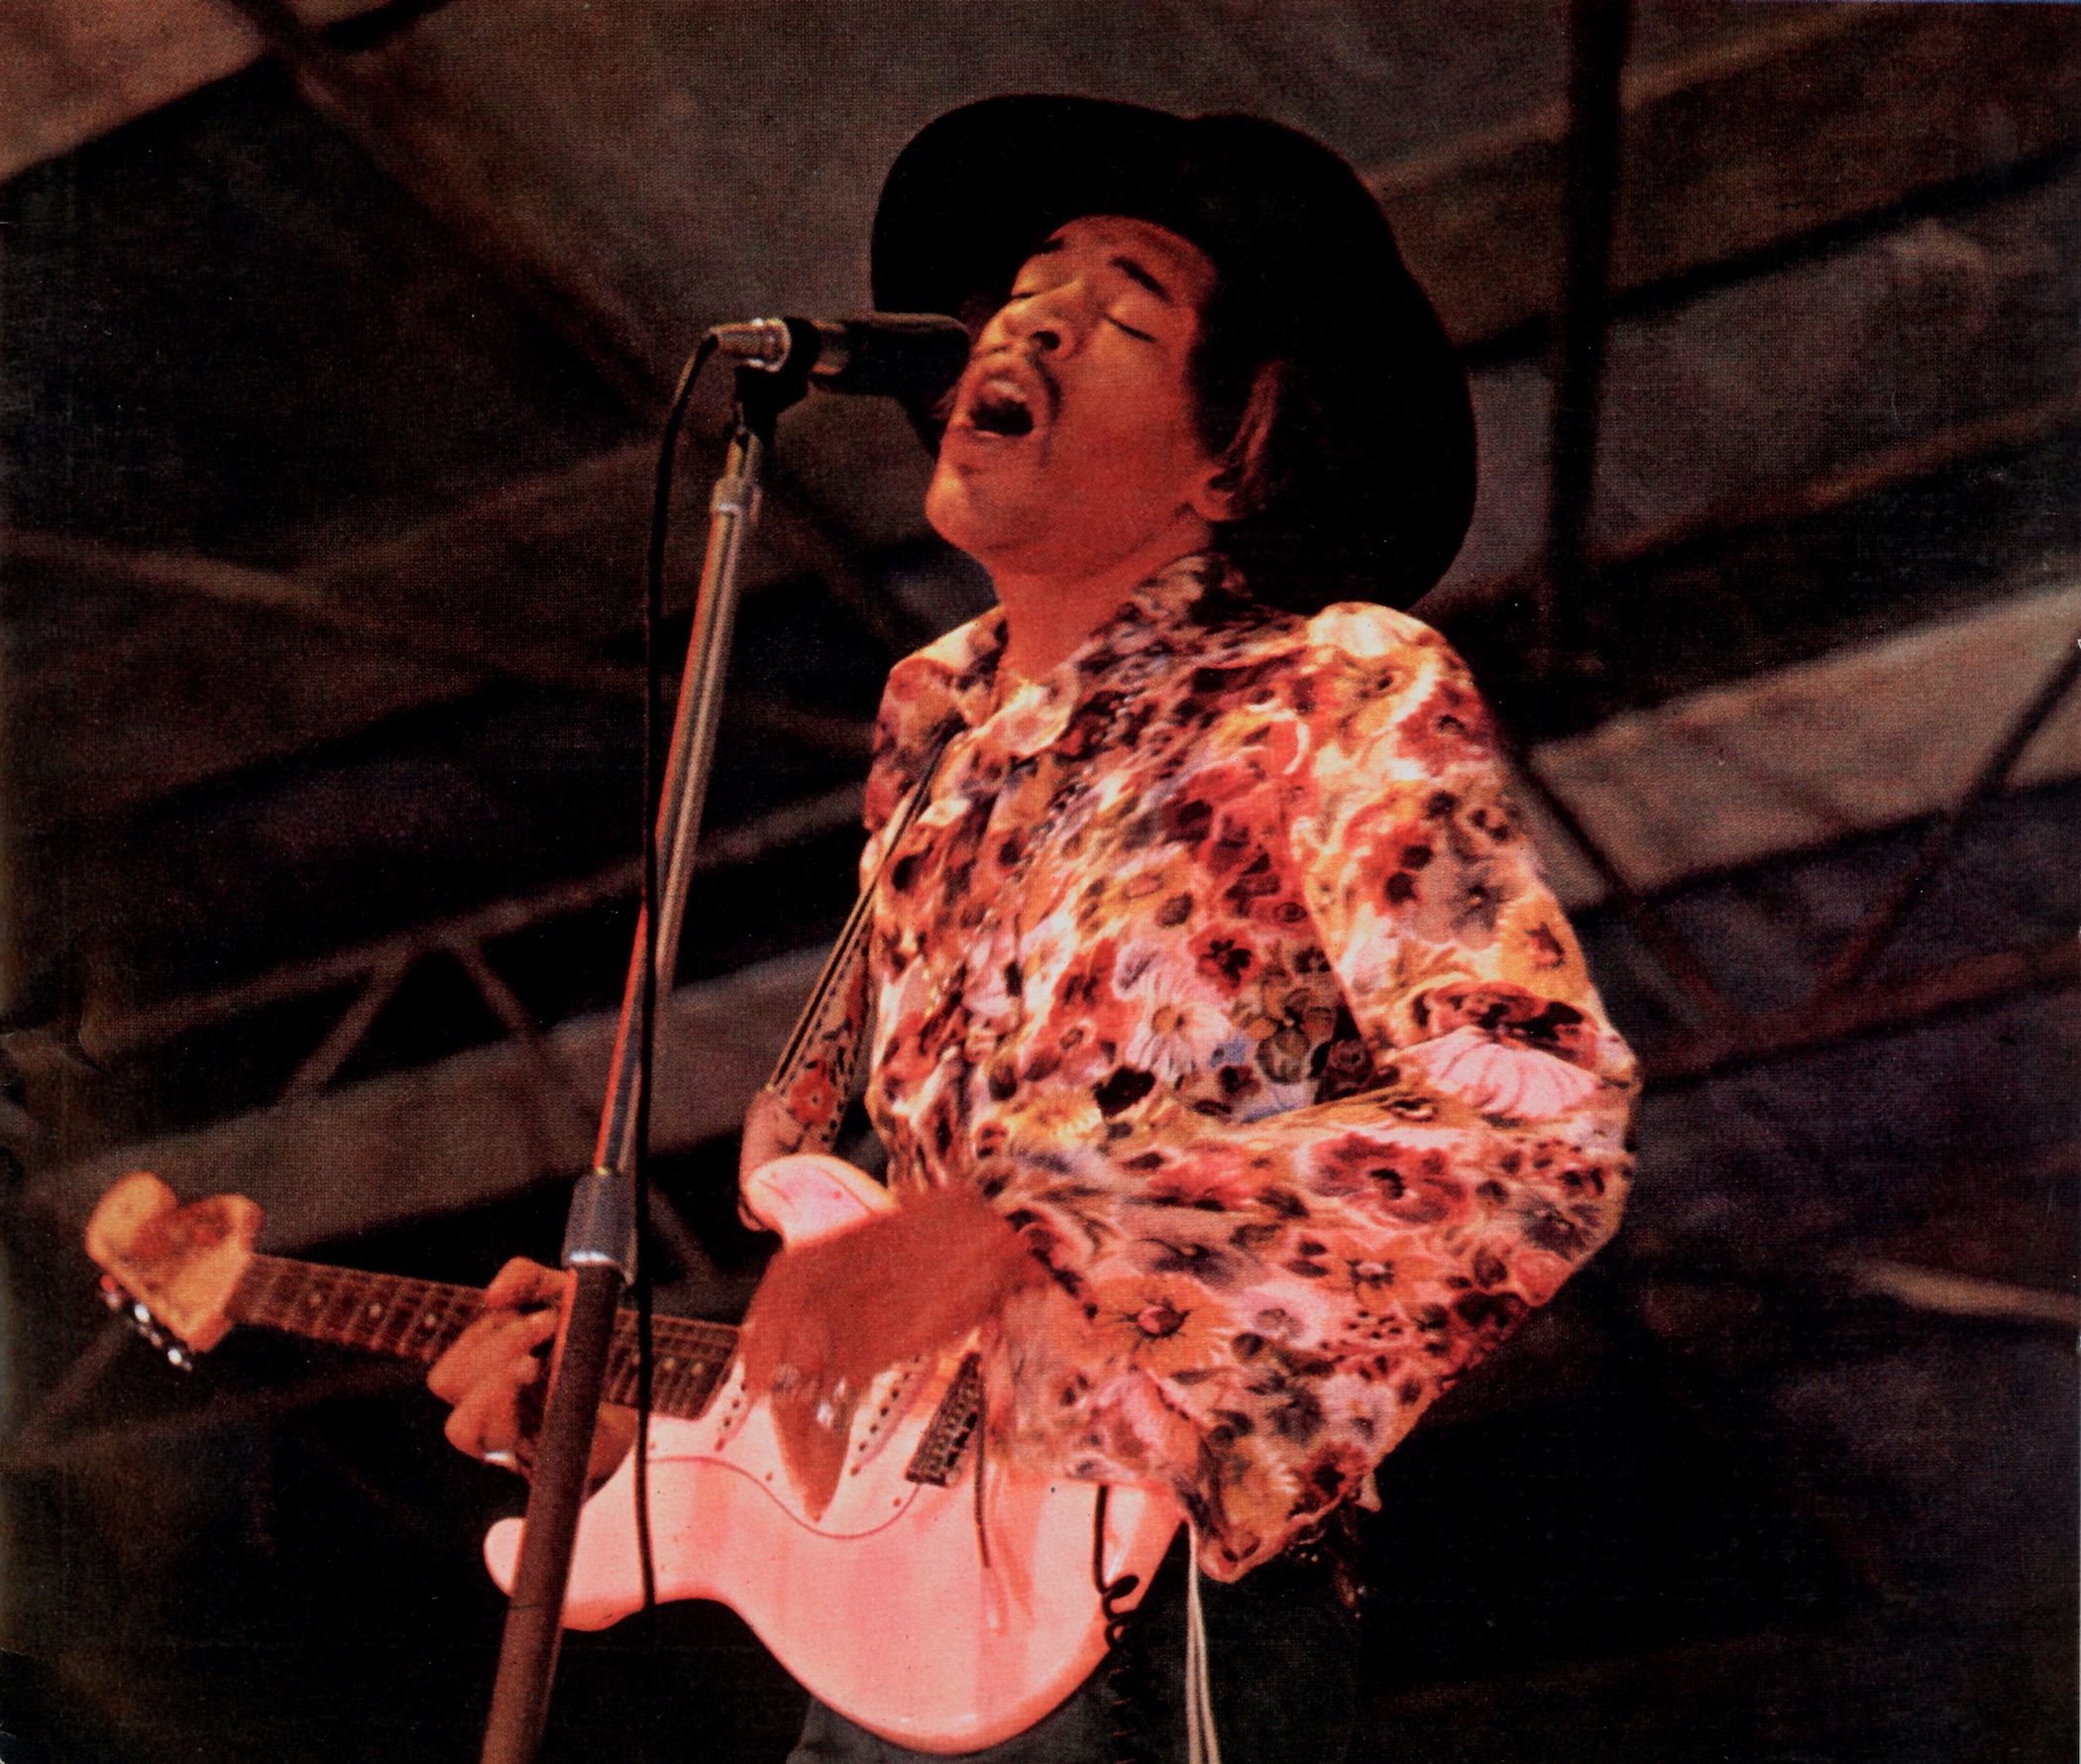 Jimi Hendrix (1942-1970) performs on stage at Woburn Pop Festival